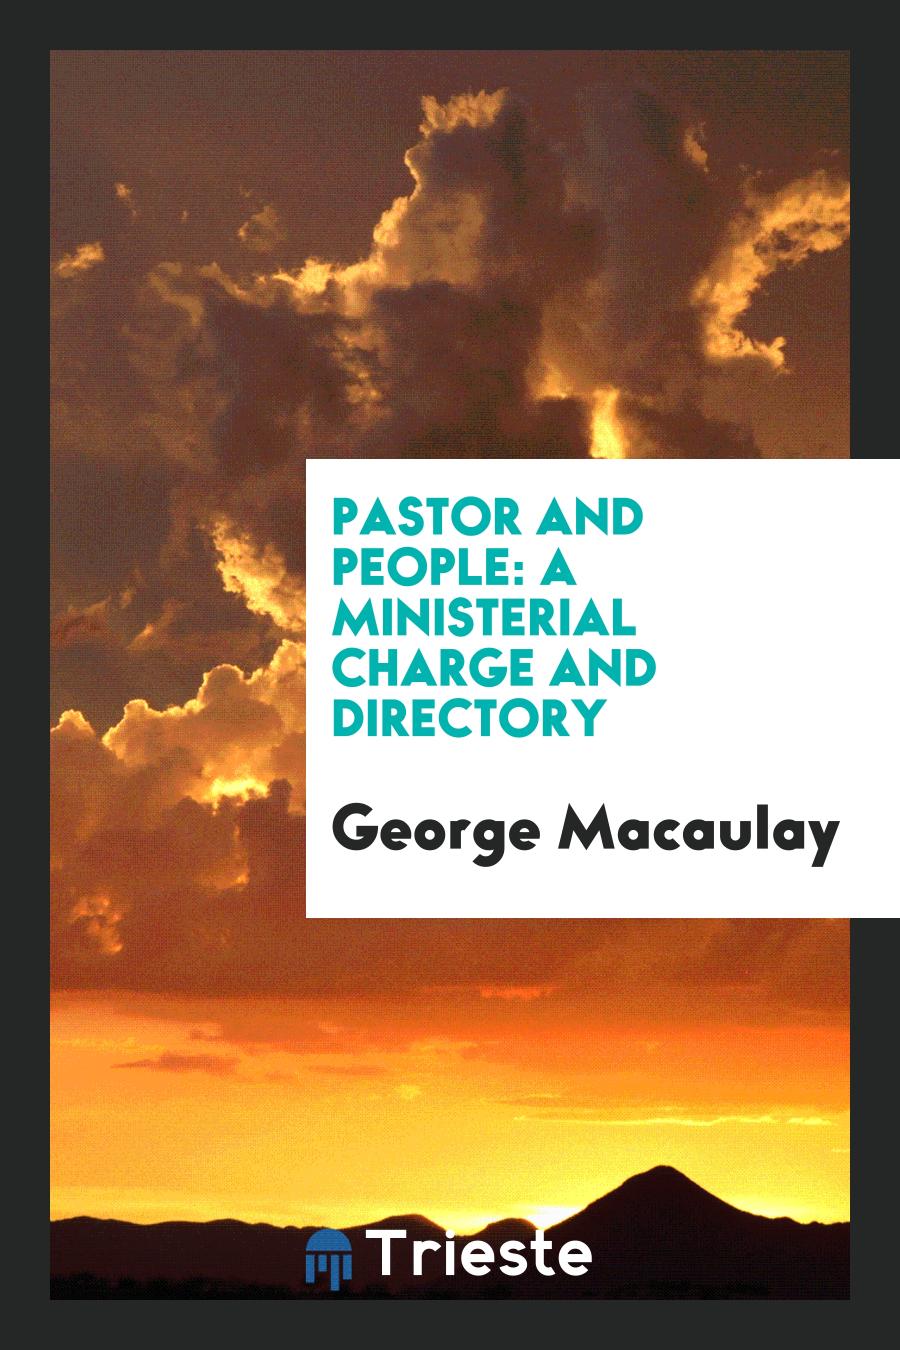 Pastor and People: A Ministerial Charge and Directory